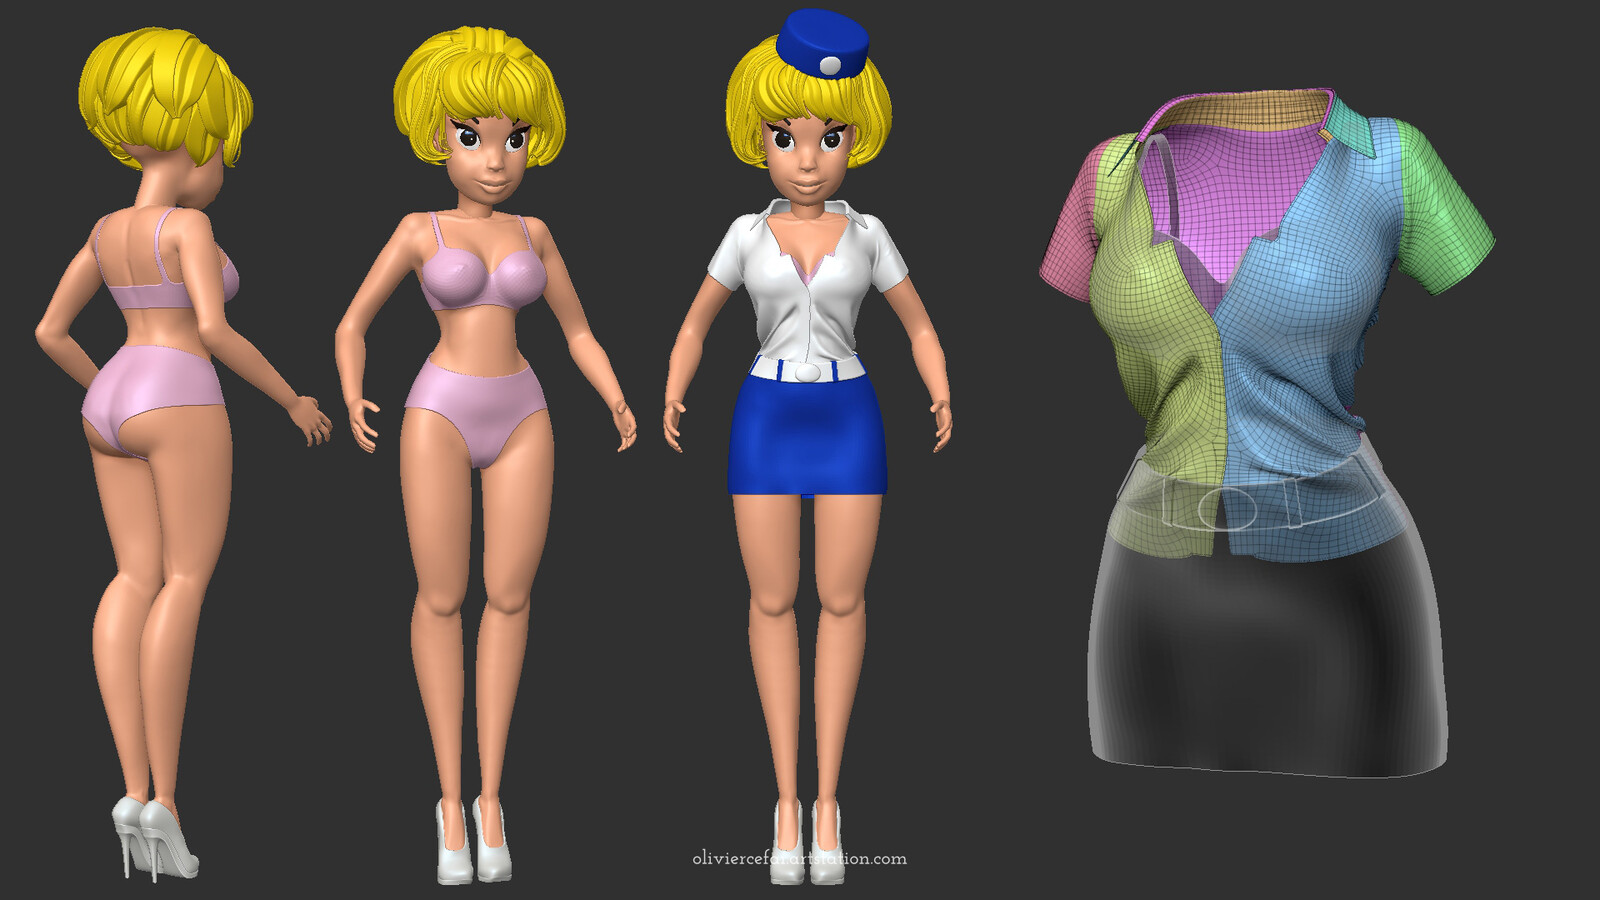 Outfits and underwear variants